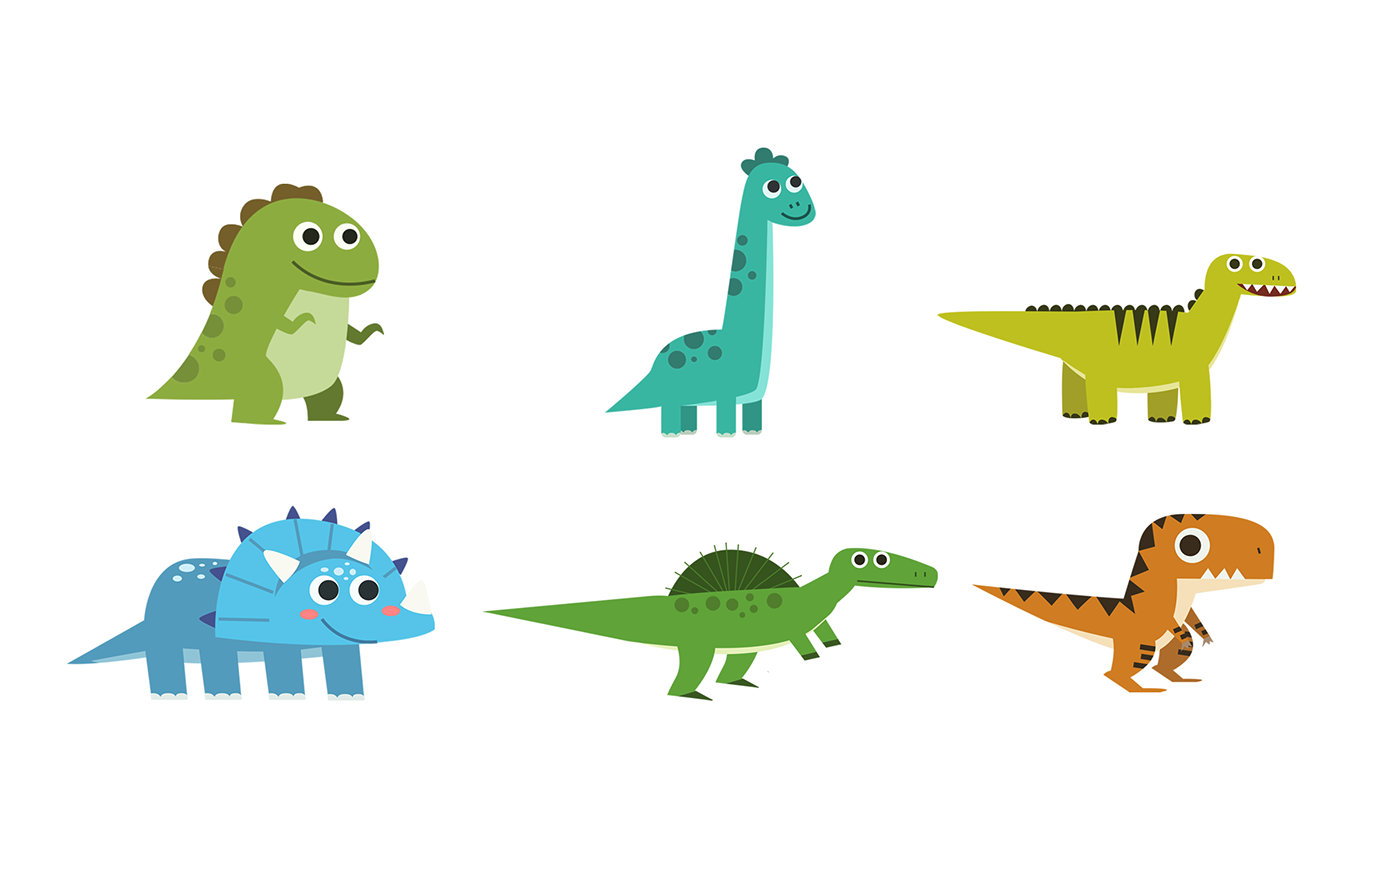 Dinosaur Cheese count music video kid song children Dino motion graphic explorer song